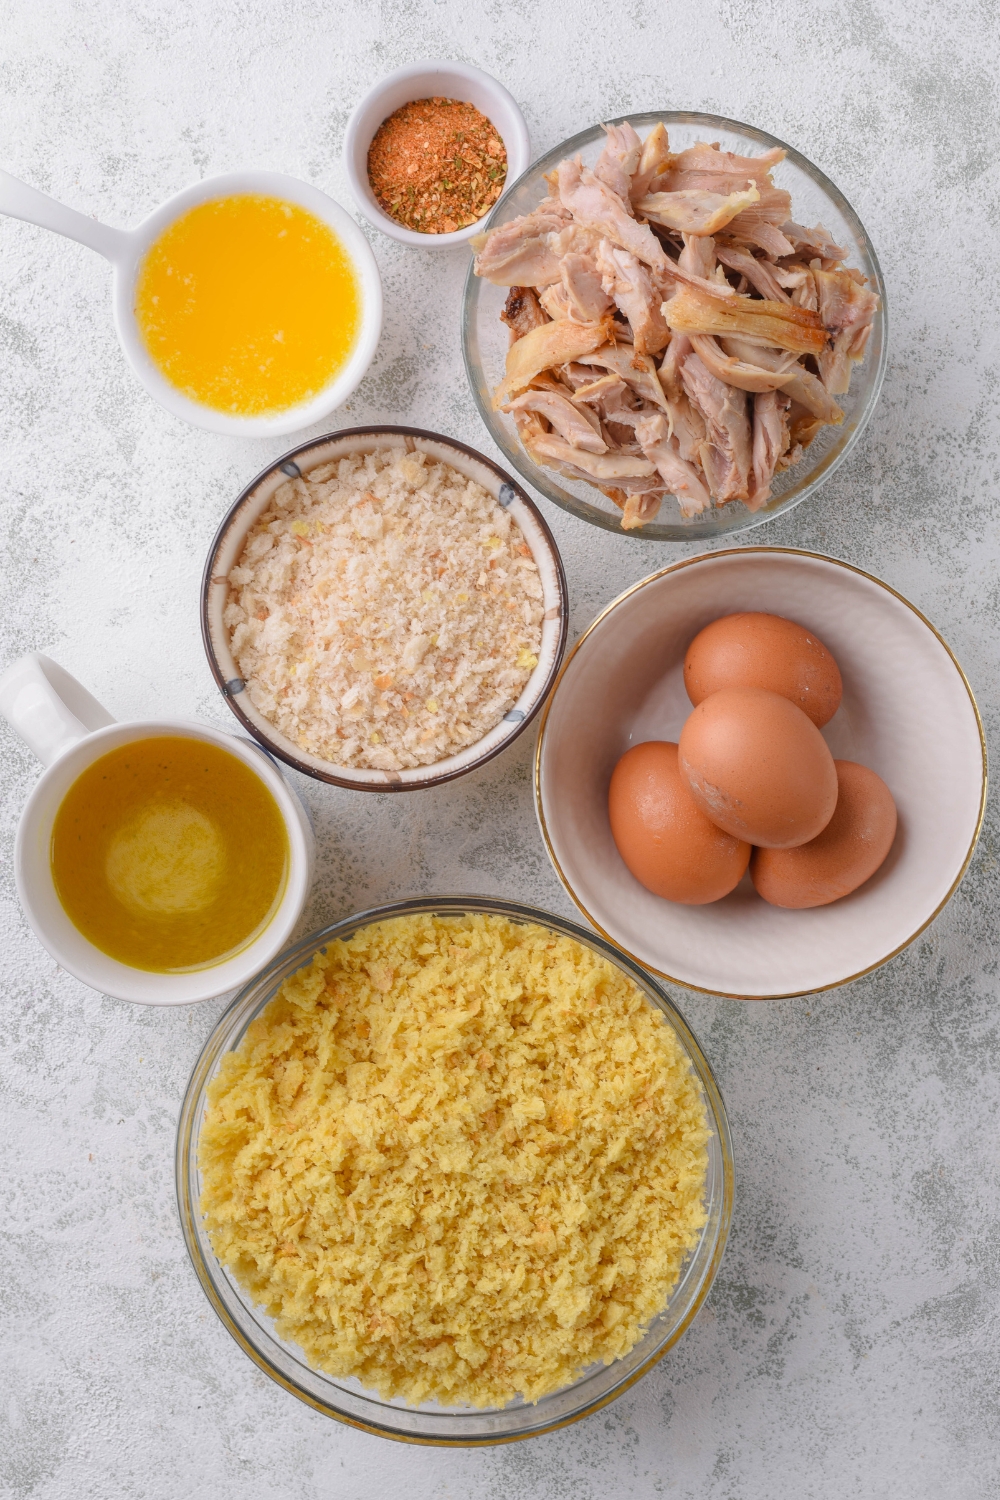 An assortment of ingredients including bowls of cornbread crumbles, four eggs, shredded chicken, bread crumbs, stock, spices, and melted butter.